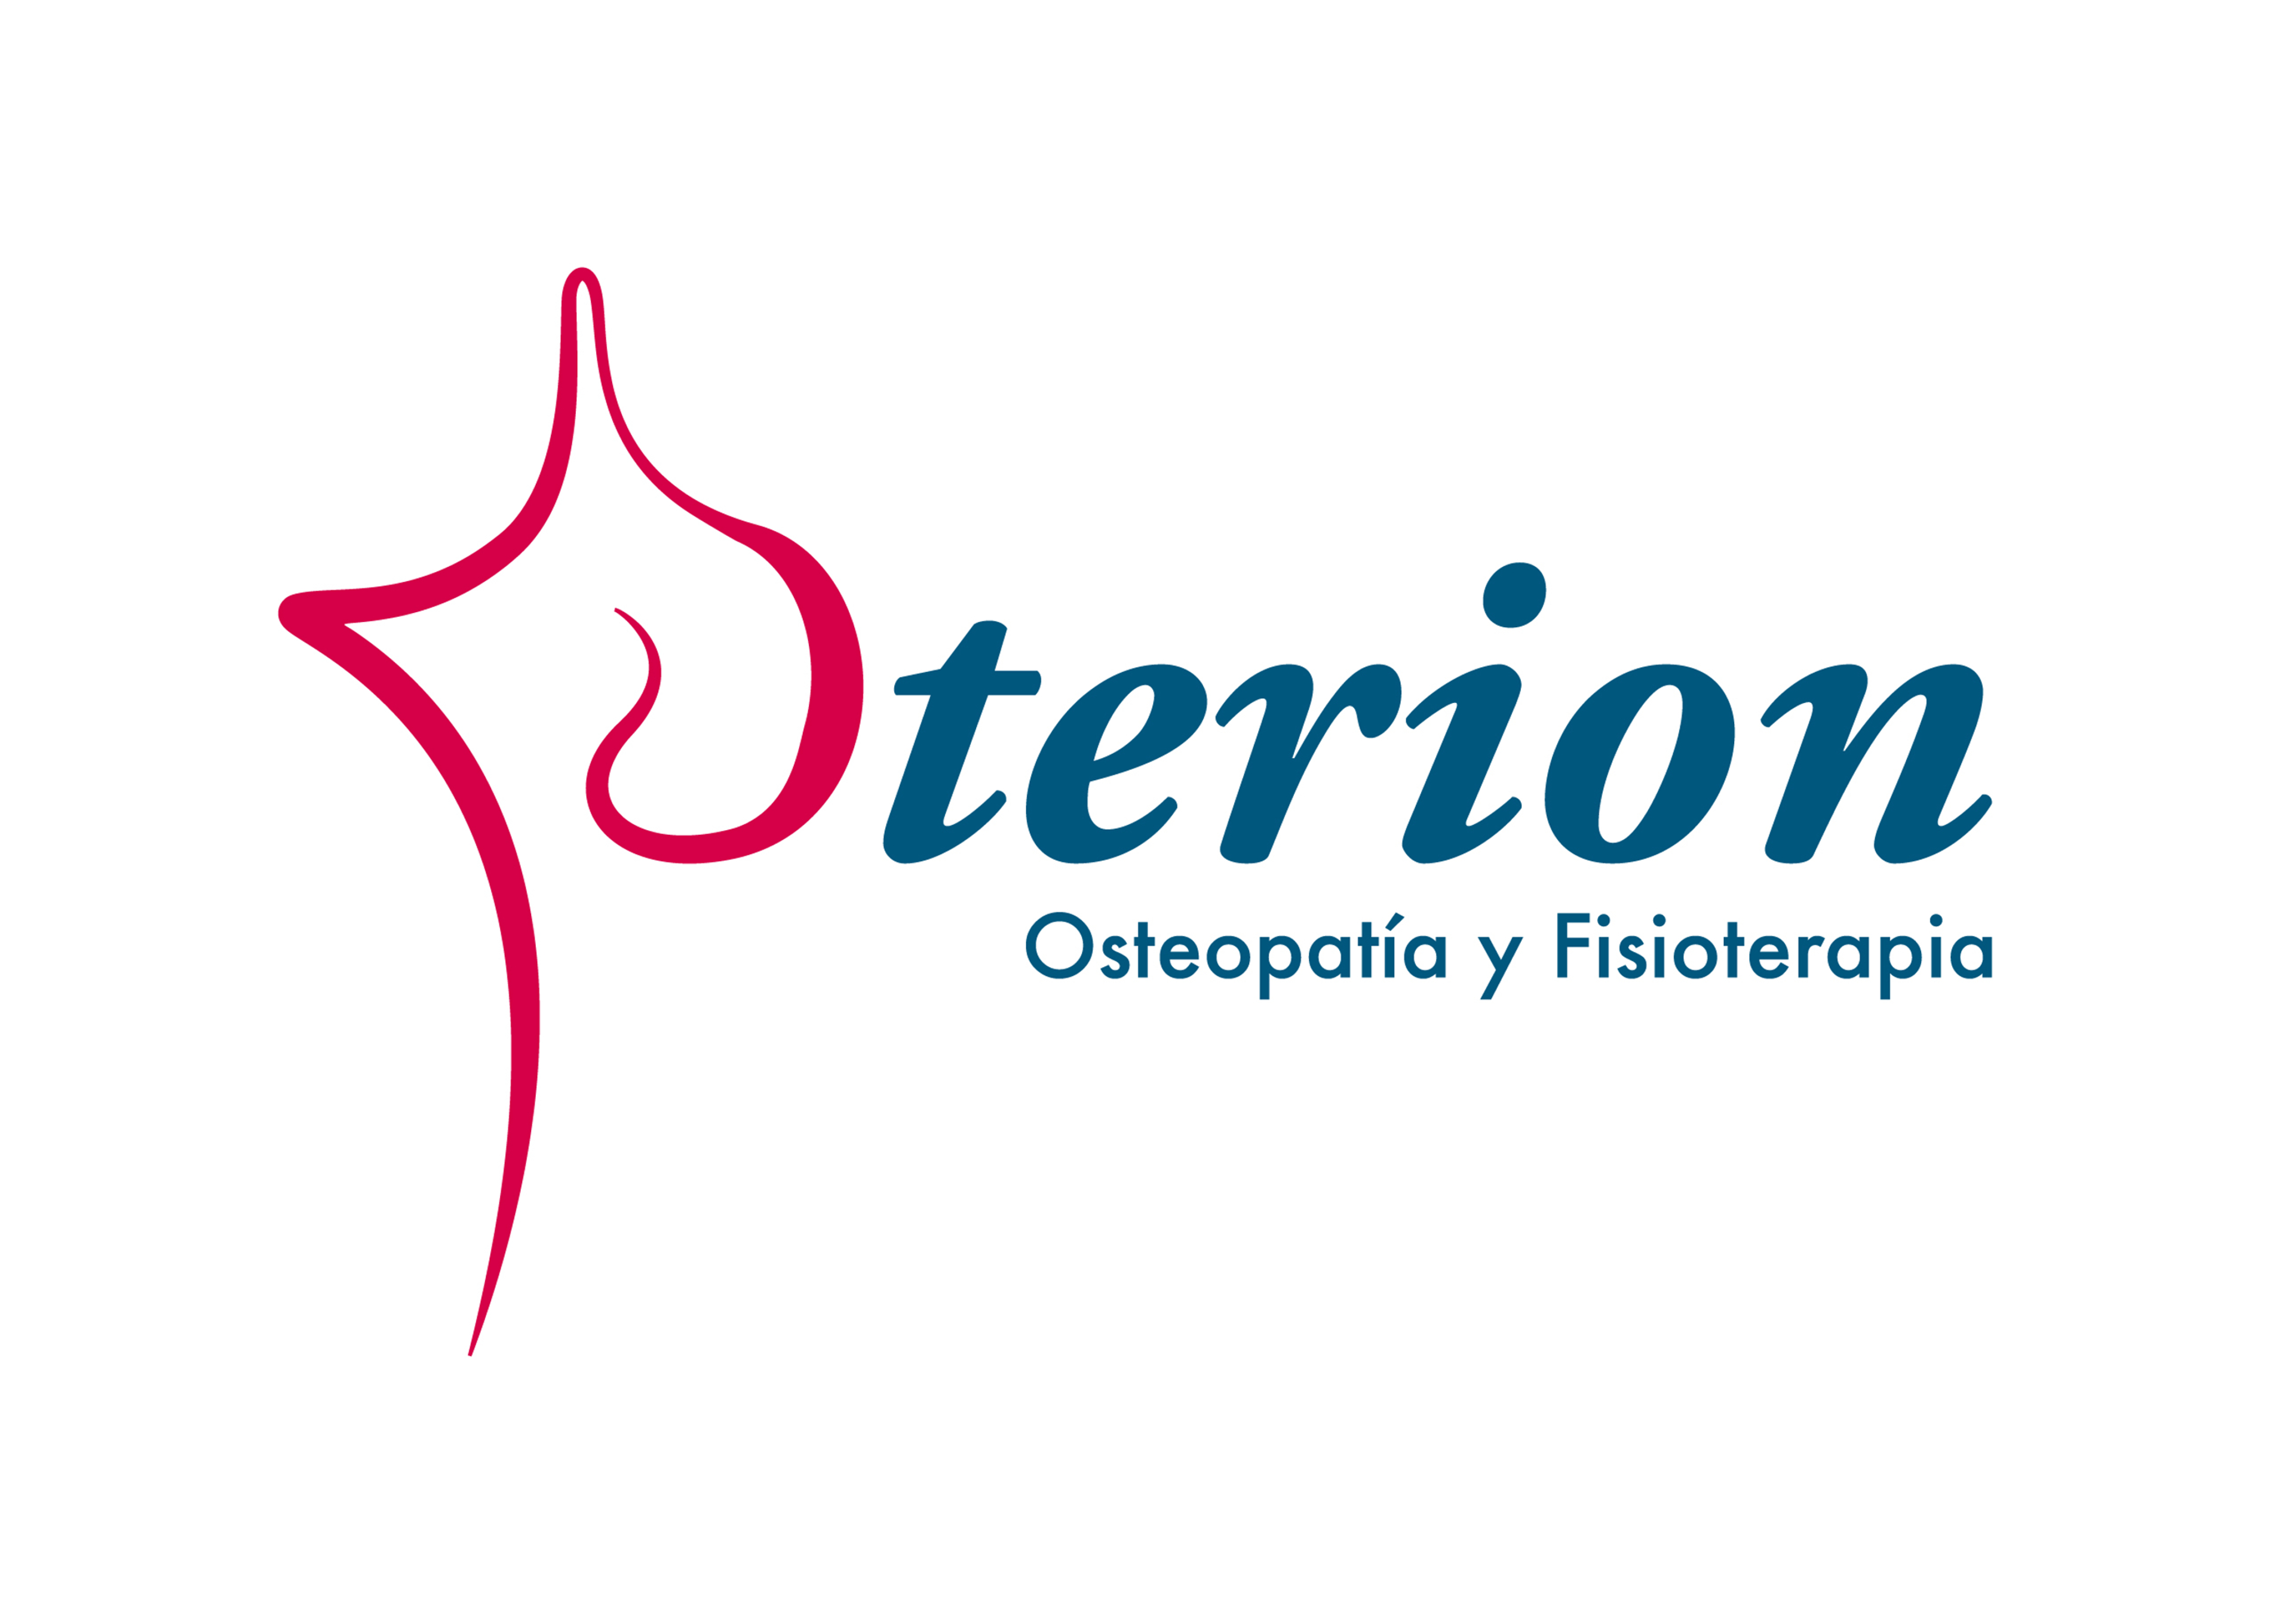 Pterion - Osteopata y Fisioterapia